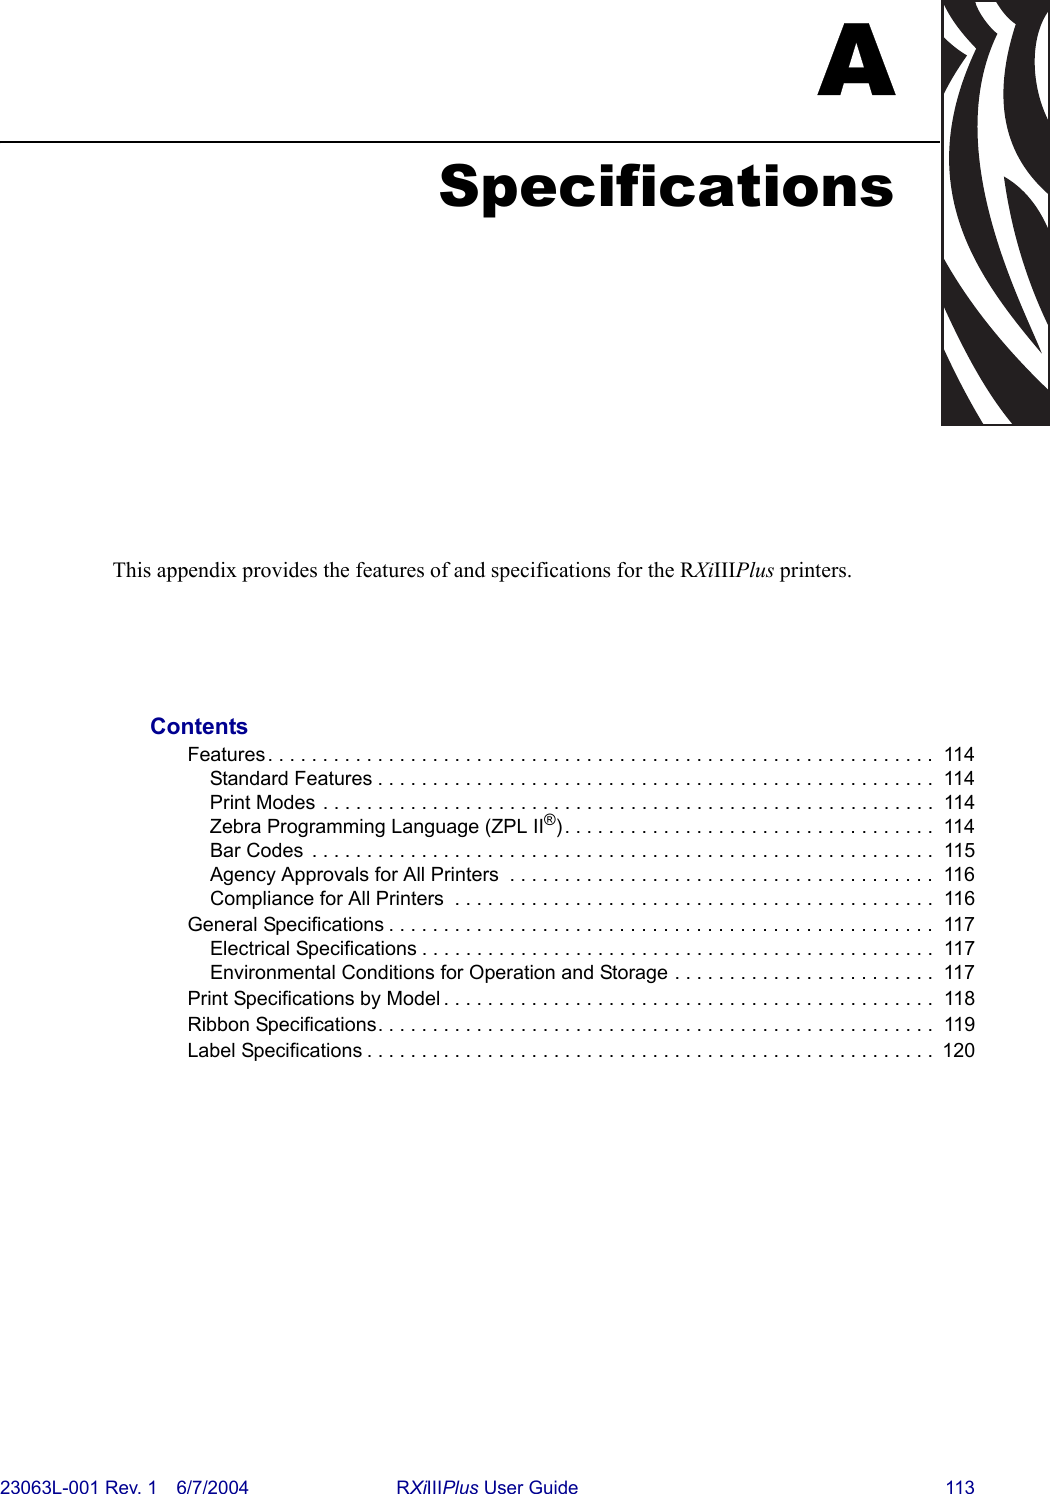 23063L-001 Rev. 1 6/7/2004 RXiIIIPlus User Guide 113ASpecificationsThis appendix provides the features of and specifications for the RXiIIIPlus printers.ContentsFeatures. . . . . . . . . . . . . . . . . . . . . . . . . . . . . . . . . . . . . . . . . . . . . . . . . . . . . . . . . . . . .  114Standard Features . . . . . . . . . . . . . . . . . . . . . . . . . . . . . . . . . . . . . . . . . . . . . . . . . . .  114Print Modes . . . . . . . . . . . . . . . . . . . . . . . . . . . . . . . . . . . . . . . . . . . . . . . . . . . . . . . .  114Zebra Programming Language (ZPL II®). . . . . . . . . . . . . . . . . . . . . . . . . . . . . . . . . .  114Bar Codes  . . . . . . . . . . . . . . . . . . . . . . . . . . . . . . . . . . . . . . . . . . . . . . . . . . . . . . . . .  115Agency Approvals for All Printers  . . . . . . . . . . . . . . . . . . . . . . . . . . . . . . . . . . . . . . .  116Compliance for All Printers  . . . . . . . . . . . . . . . . . . . . . . . . . . . . . . . . . . . . . . . . . . . .  116General Specifications . . . . . . . . . . . . . . . . . . . . . . . . . . . . . . . . . . . . . . . . . . . . . . . . . .  117Electrical Specifications . . . . . . . . . . . . . . . . . . . . . . . . . . . . . . . . . . . . . . . . . . . . . . .  117Environmental Conditions for Operation and Storage . . . . . . . . . . . . . . . . . . . . . . . .  117Print Specifications by Model . . . . . . . . . . . . . . . . . . . . . . . . . . . . . . . . . . . . . . . . . . . . .  118Ribbon Specifications. . . . . . . . . . . . . . . . . . . . . . . . . . . . . . . . . . . . . . . . . . . . . . . . . . .  119Label Specifications . . . . . . . . . . . . . . . . . . . . . . . . . . . . . . . . . . . . . . . . . . . . . . . . . . . .  120